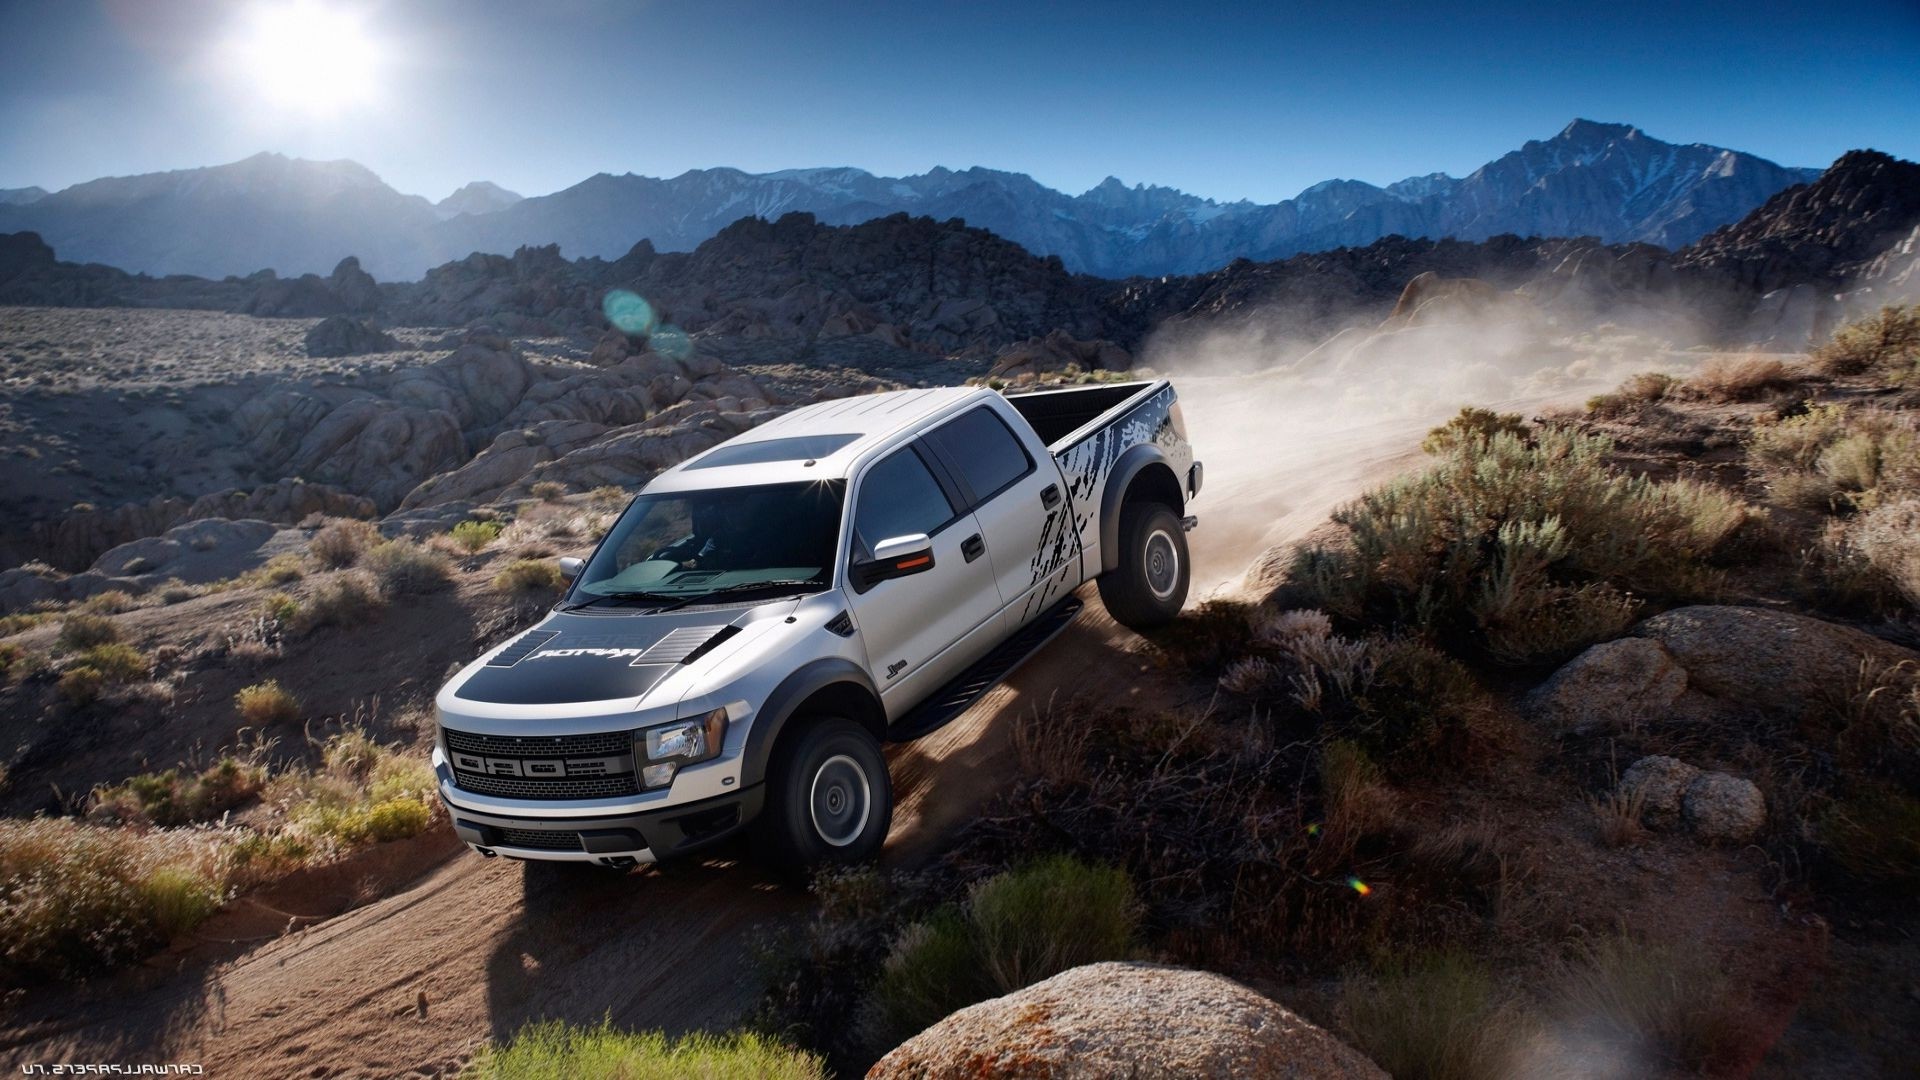 1920x1080 Free Amazing Ford Raptor Images - HD Wallpapers